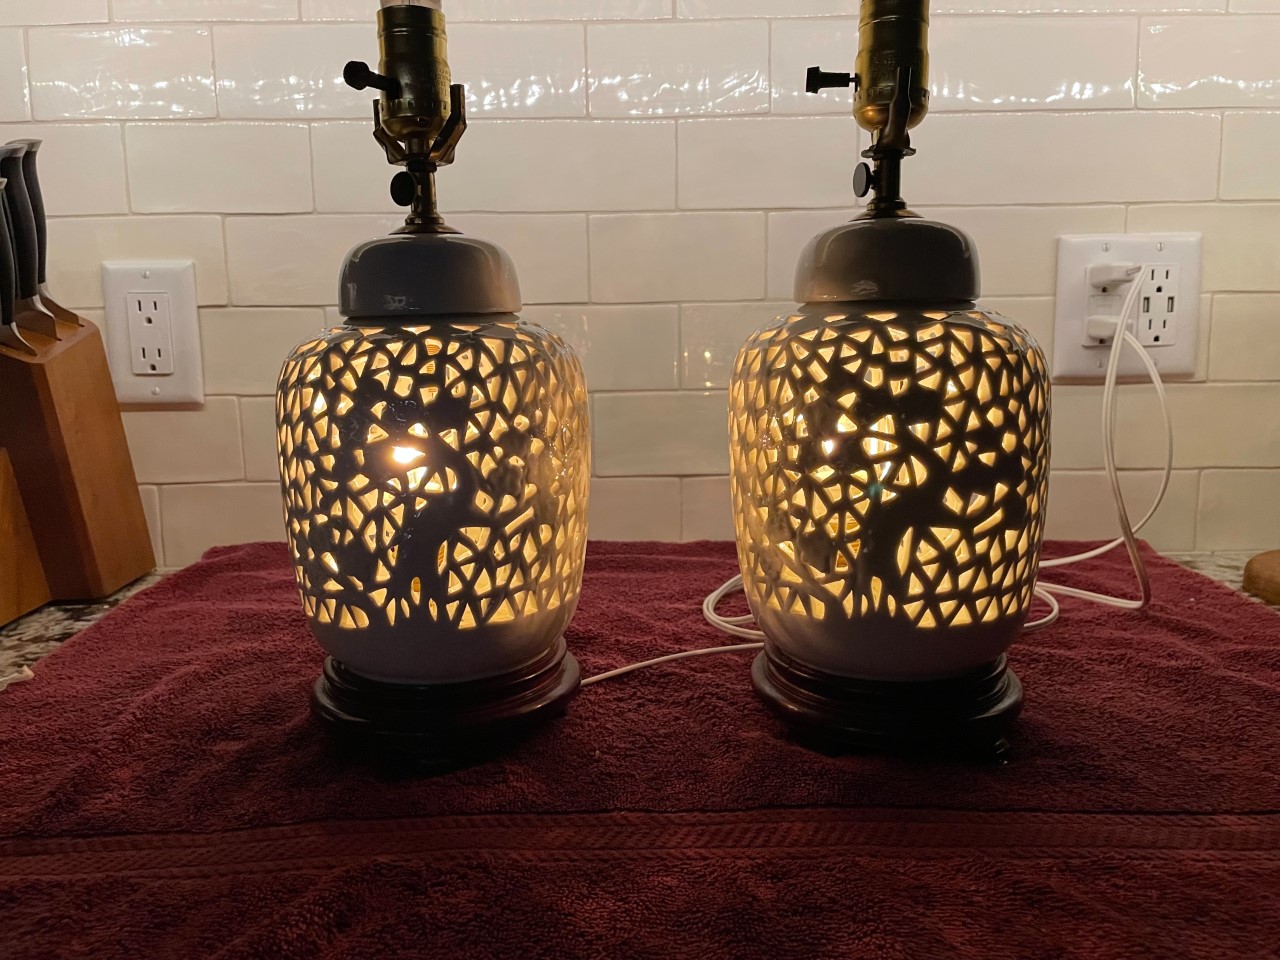 two lamps on the table with lights on